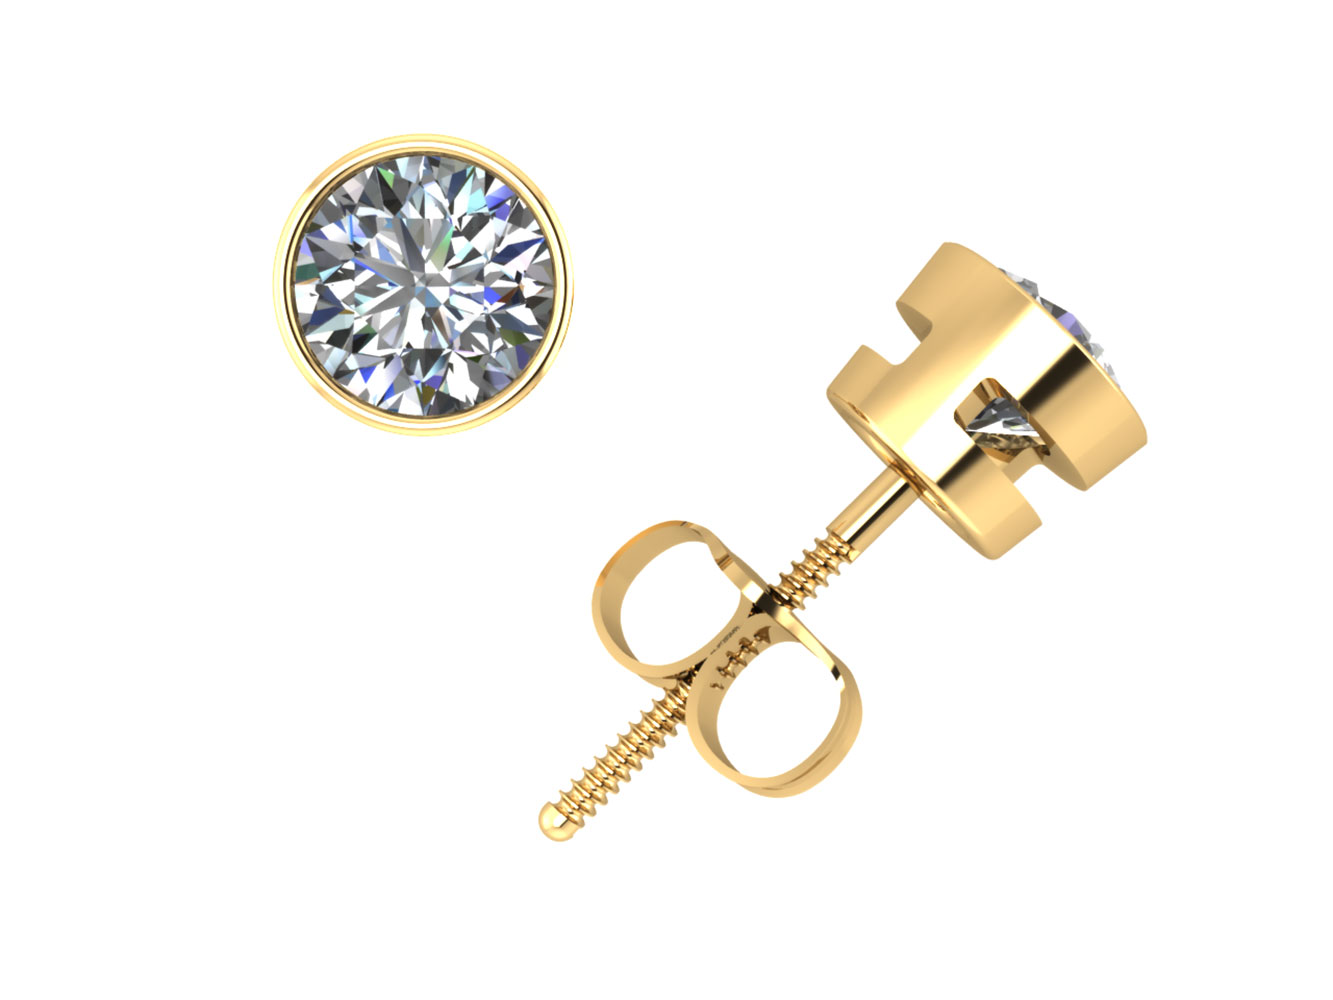 Jewel We Sell Real 3/4Ct Round Diamond Stud Earrings 14k White or Yellow Gold Bezel Set Screwback G SI1